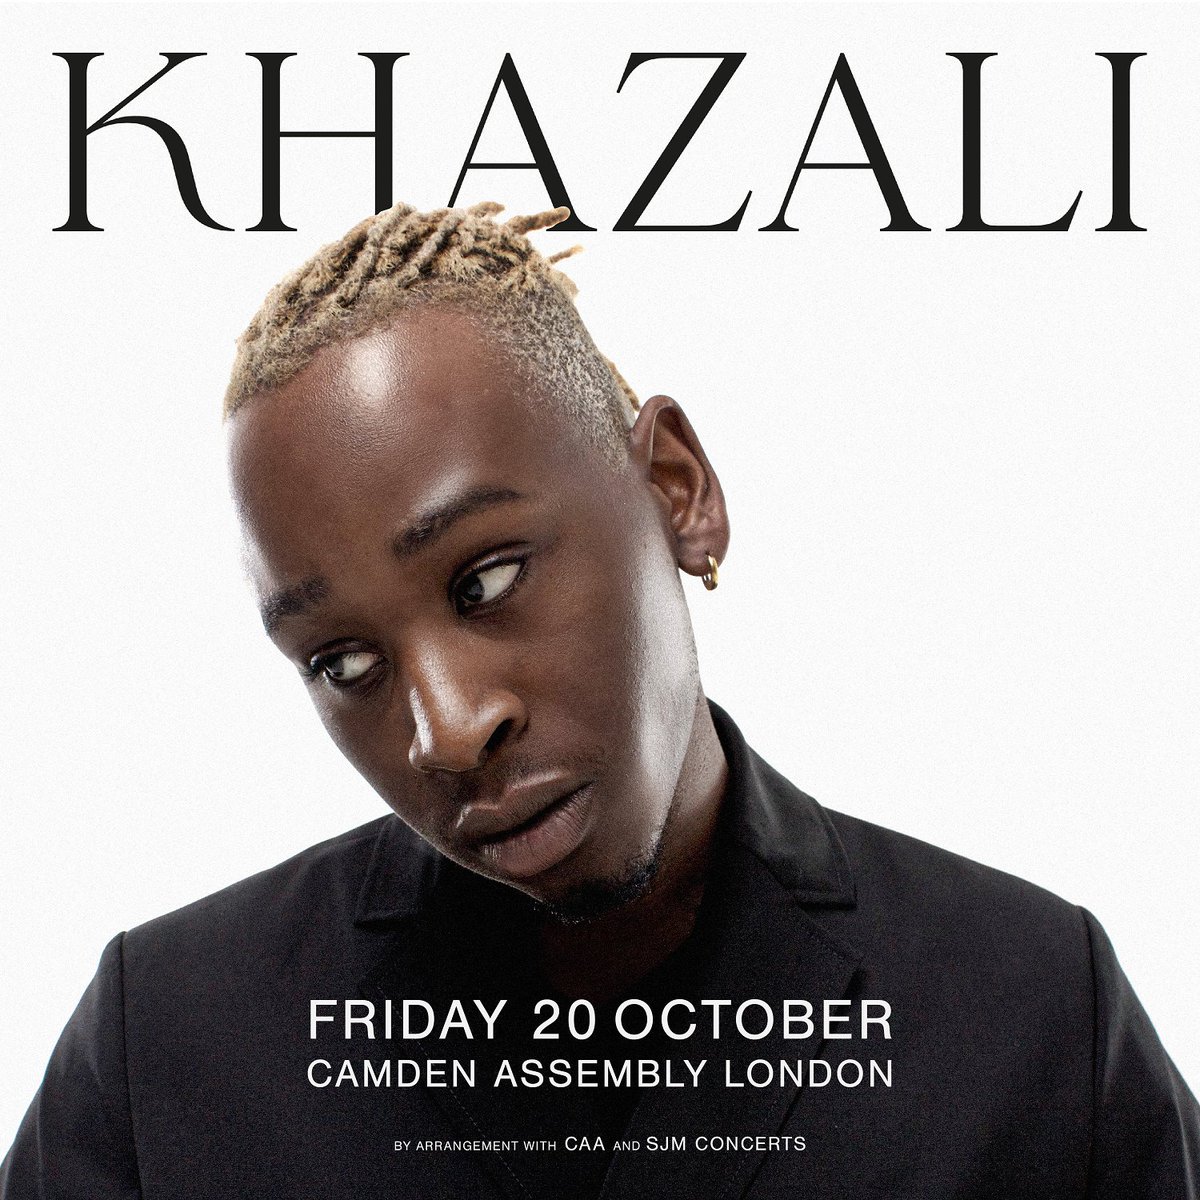 Excited to have KHAZALI join us at Camden Assembly this October for a special headline show! This fast-rising artist know for his knack for addictive melodies and moving lyricism will be sure to bring the good vibes to Camden this October. Tickets here: bit.ly/3KGpVdk